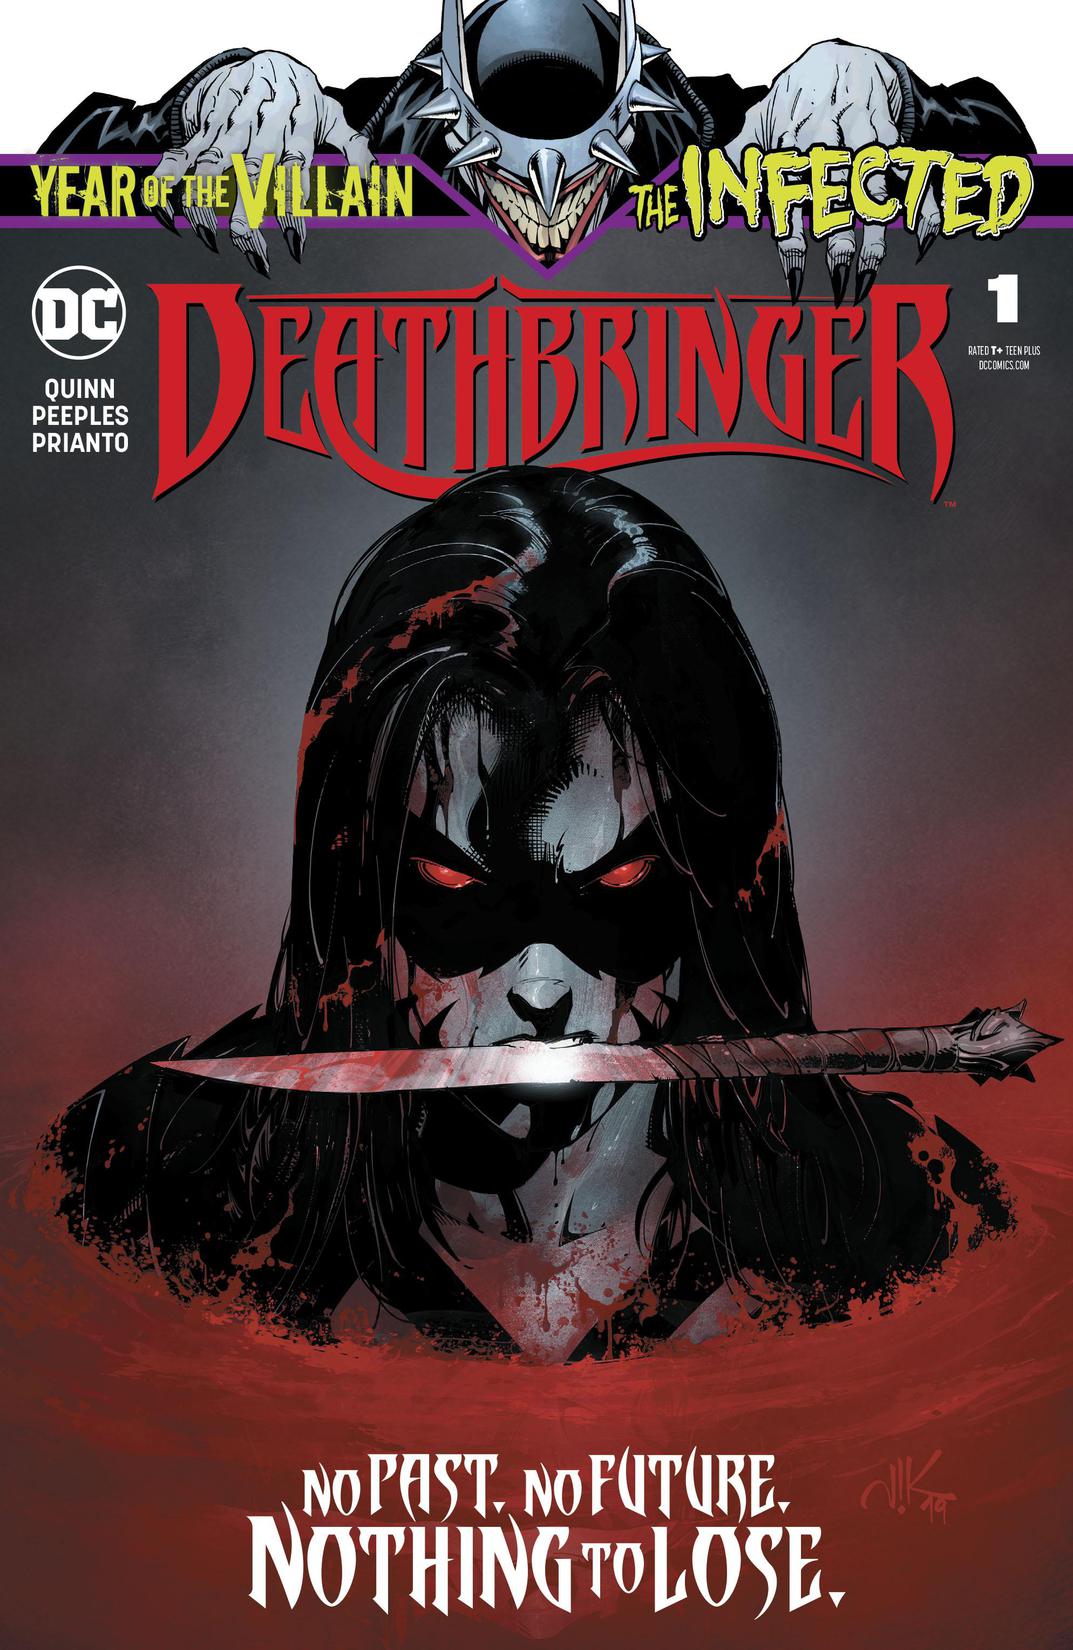 The Infected: Deathbringer #1 preview images